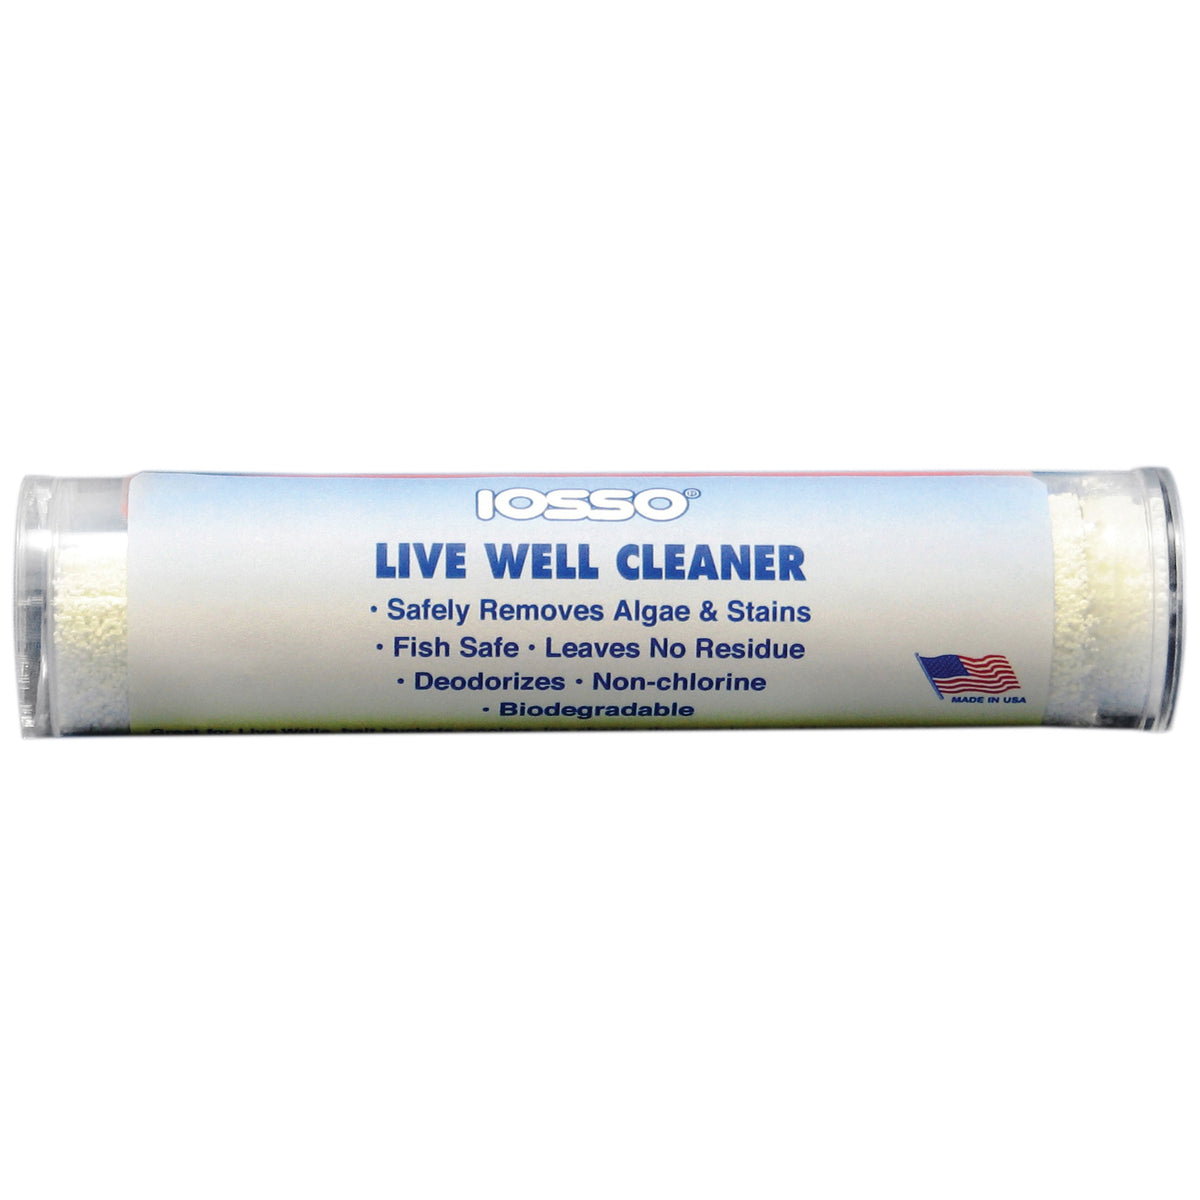 Iosso 10904 Fish-Safe Live Well Cleaner - 4 oz.